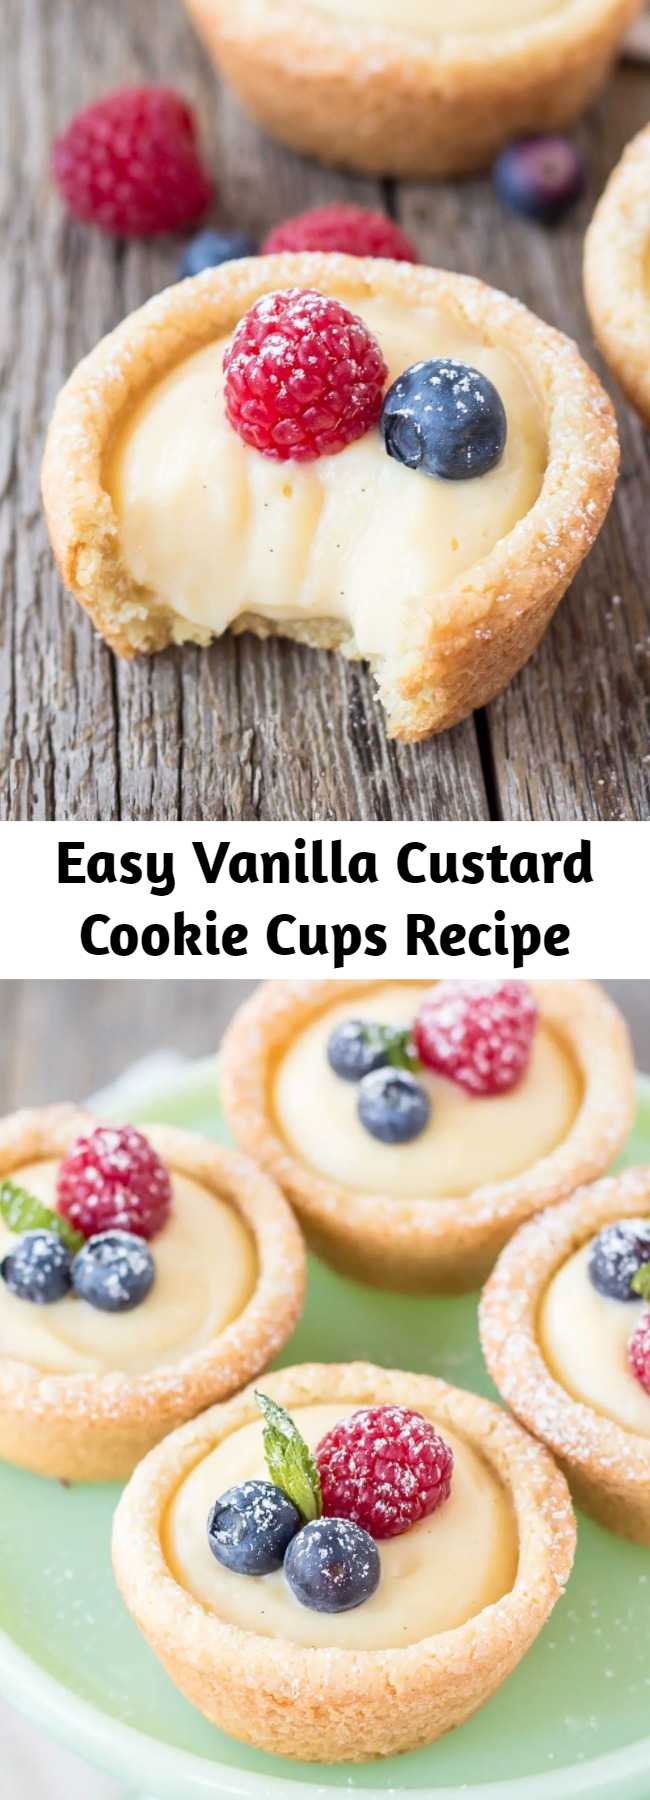 Easy Vanilla Custard Cookie Cups Recipe - Bite-sized sugar cookie cups filled with a creamy vanilla custard. Topped off with some fresh berries and a simple dusting of powdered sugar, these Vanilla Custard Cookie Cups are the perfect treat to tide you over until spring and summer.